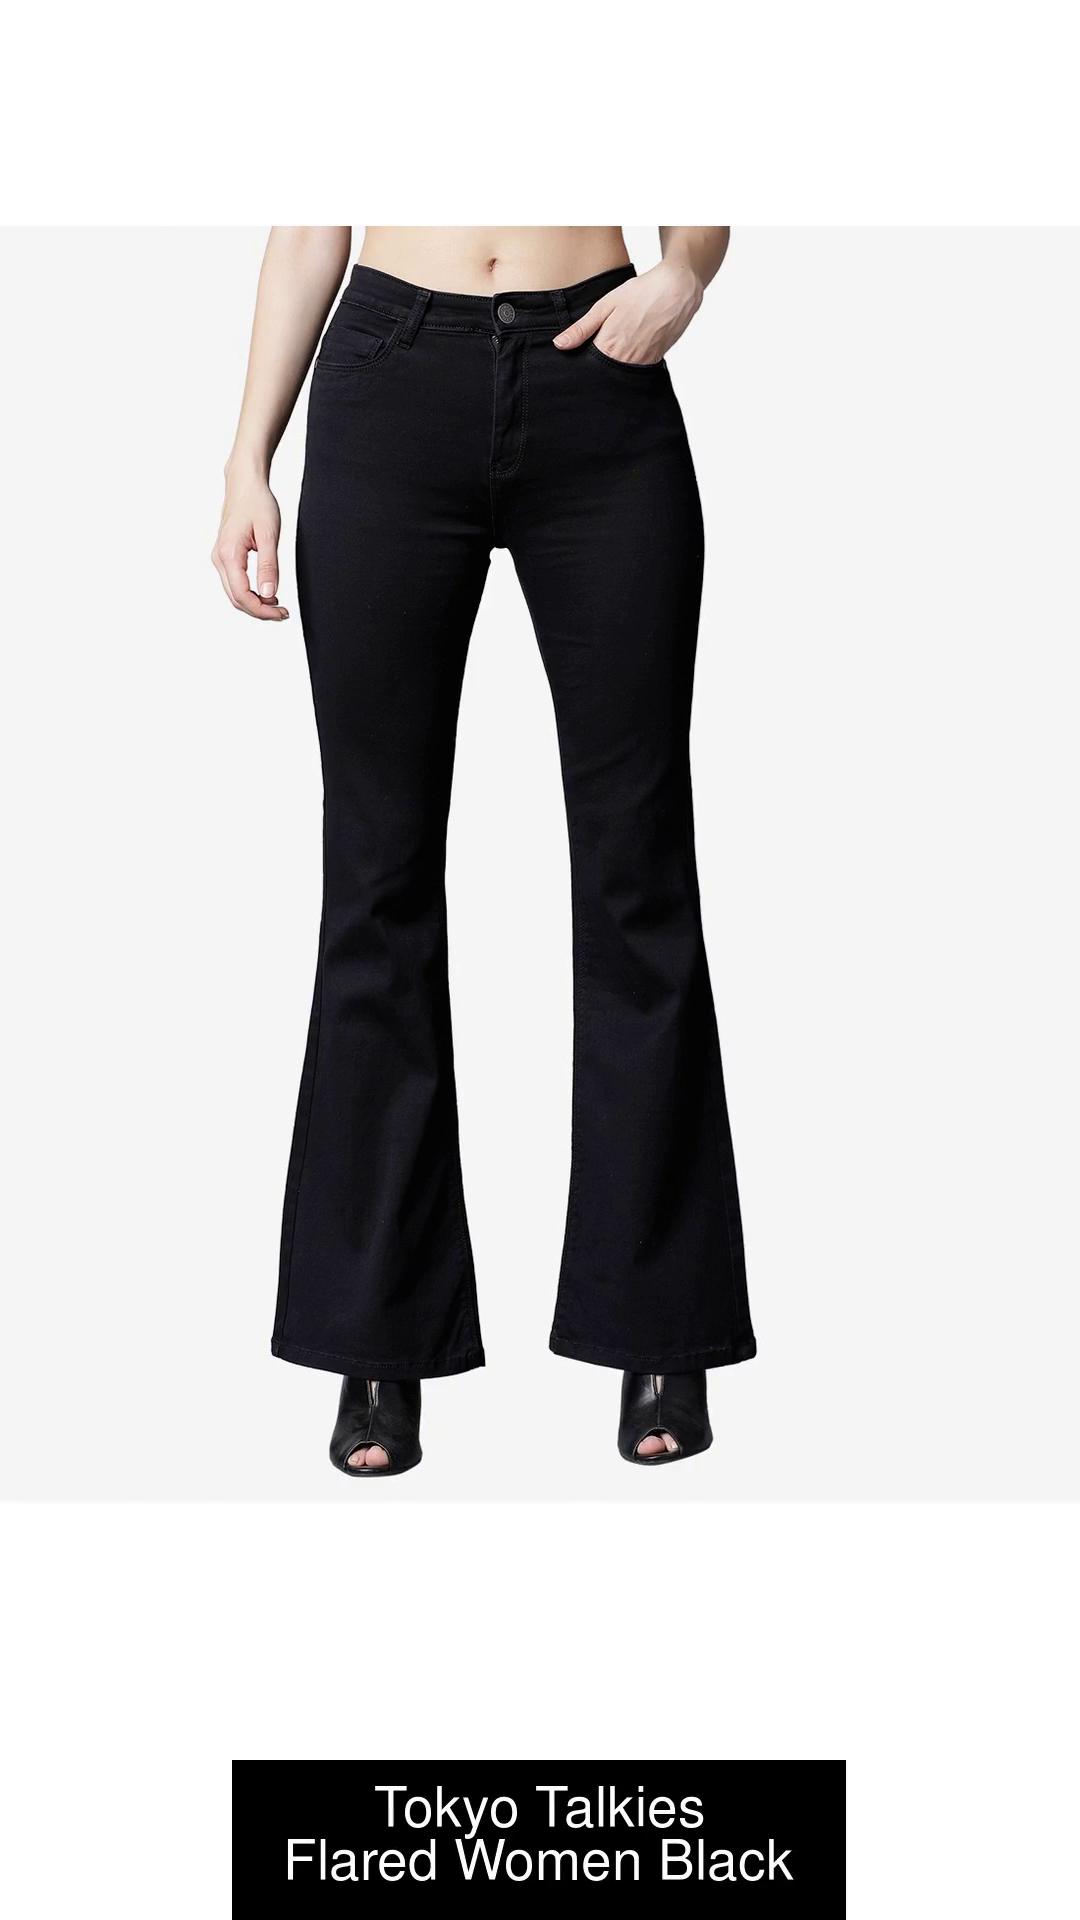 FAST TRAIN Flared Women Black Jeans - Buy FAST TRAIN Flared Women Black  Jeans Online at Best Prices in India